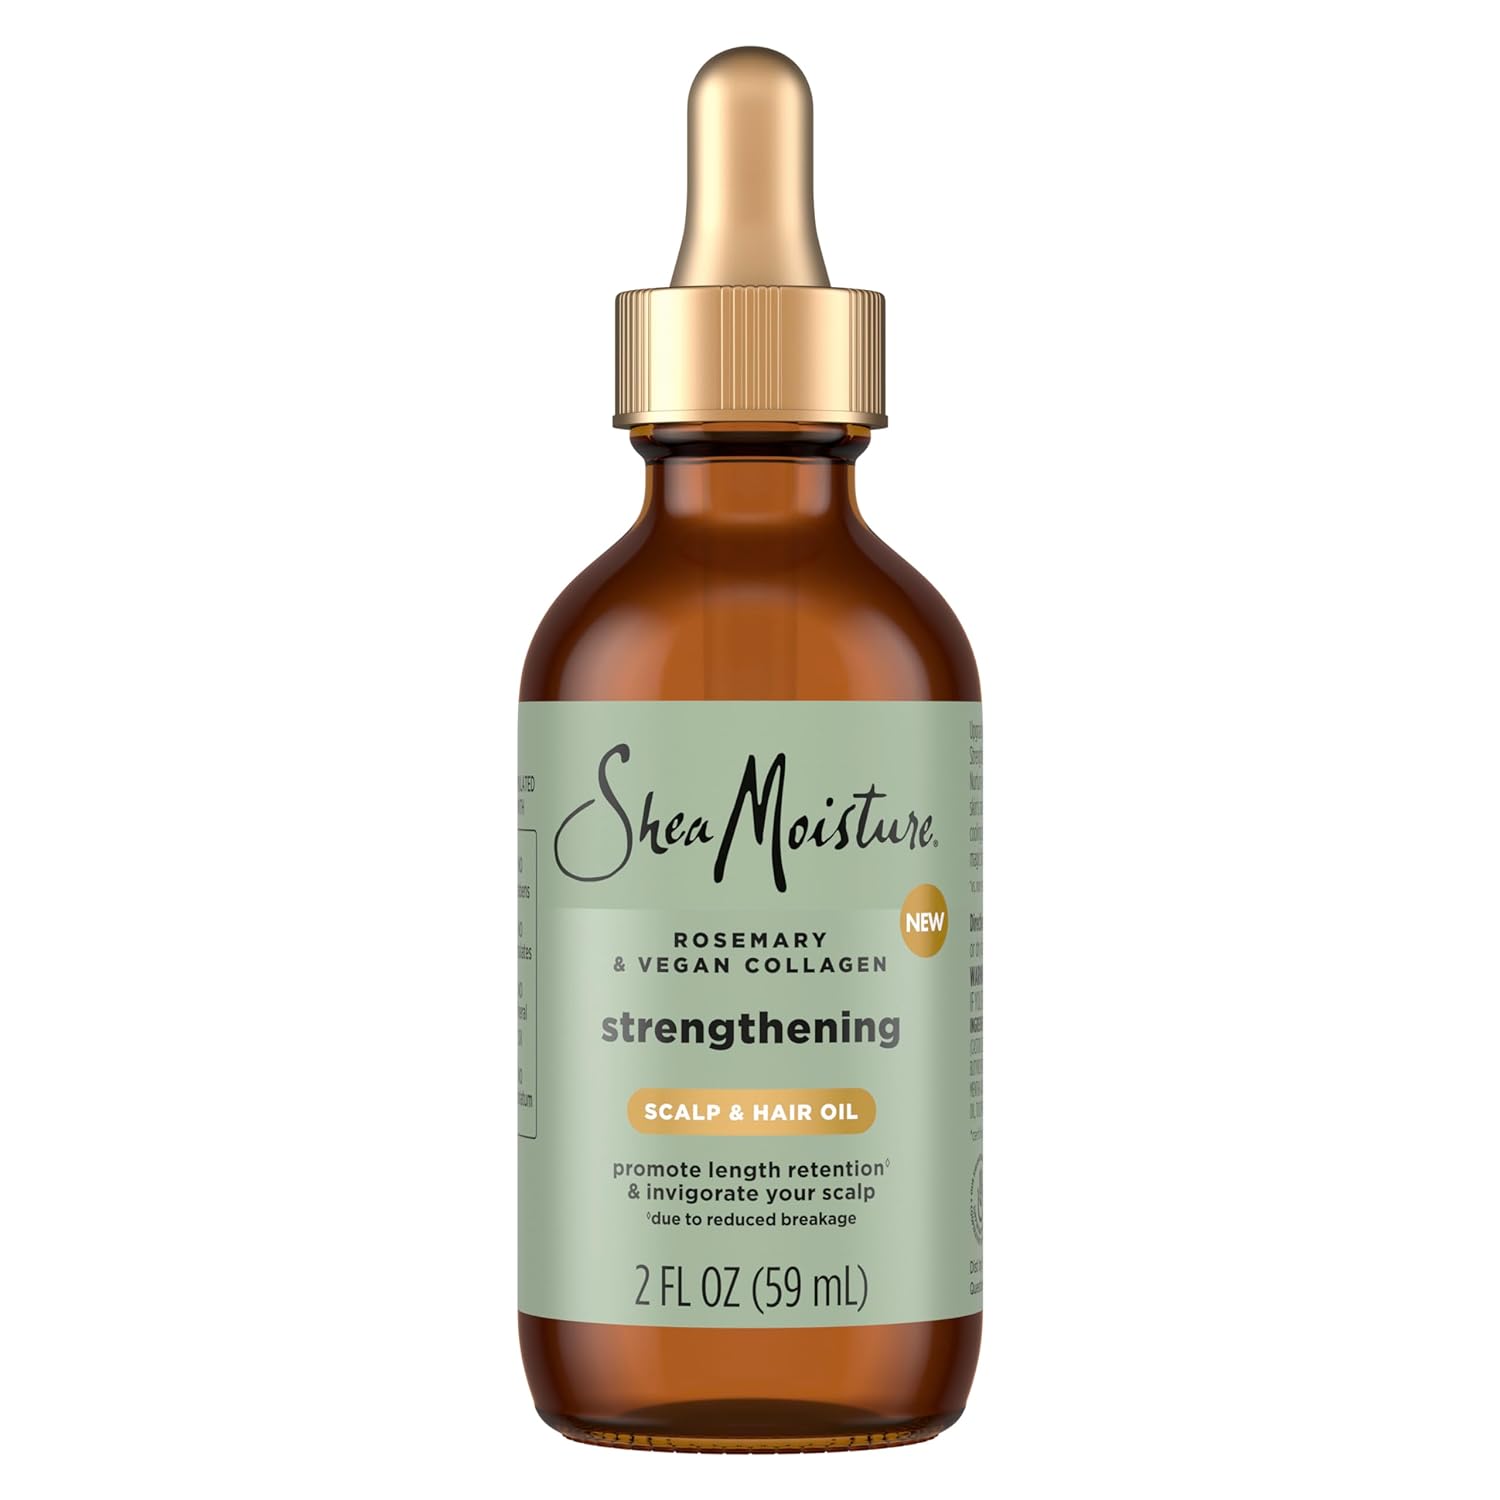 SheaMoisture Strengthening Scalp & Hair Oil Rosemary & Vegan Collagen to Promote Length Retention & Invigorate the Scalp, with ScalpBoost Technology, 2 oz